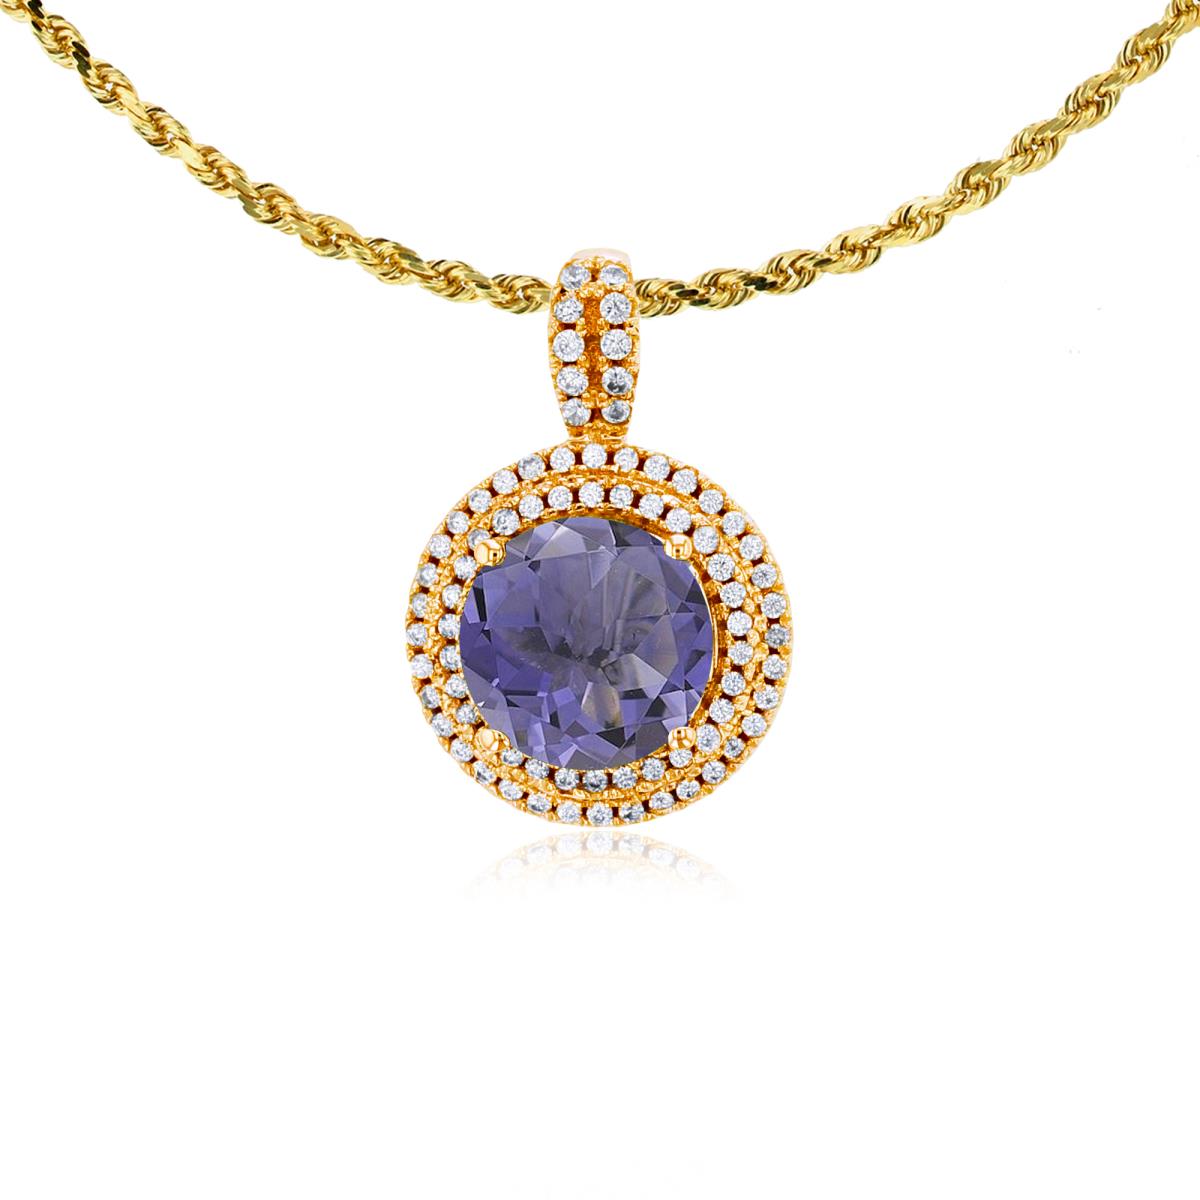 10K Yellow Gold 7mm Round Iolite & 0.25 CTTW Diamonds Double Halo 18" Rope Chain Necklace